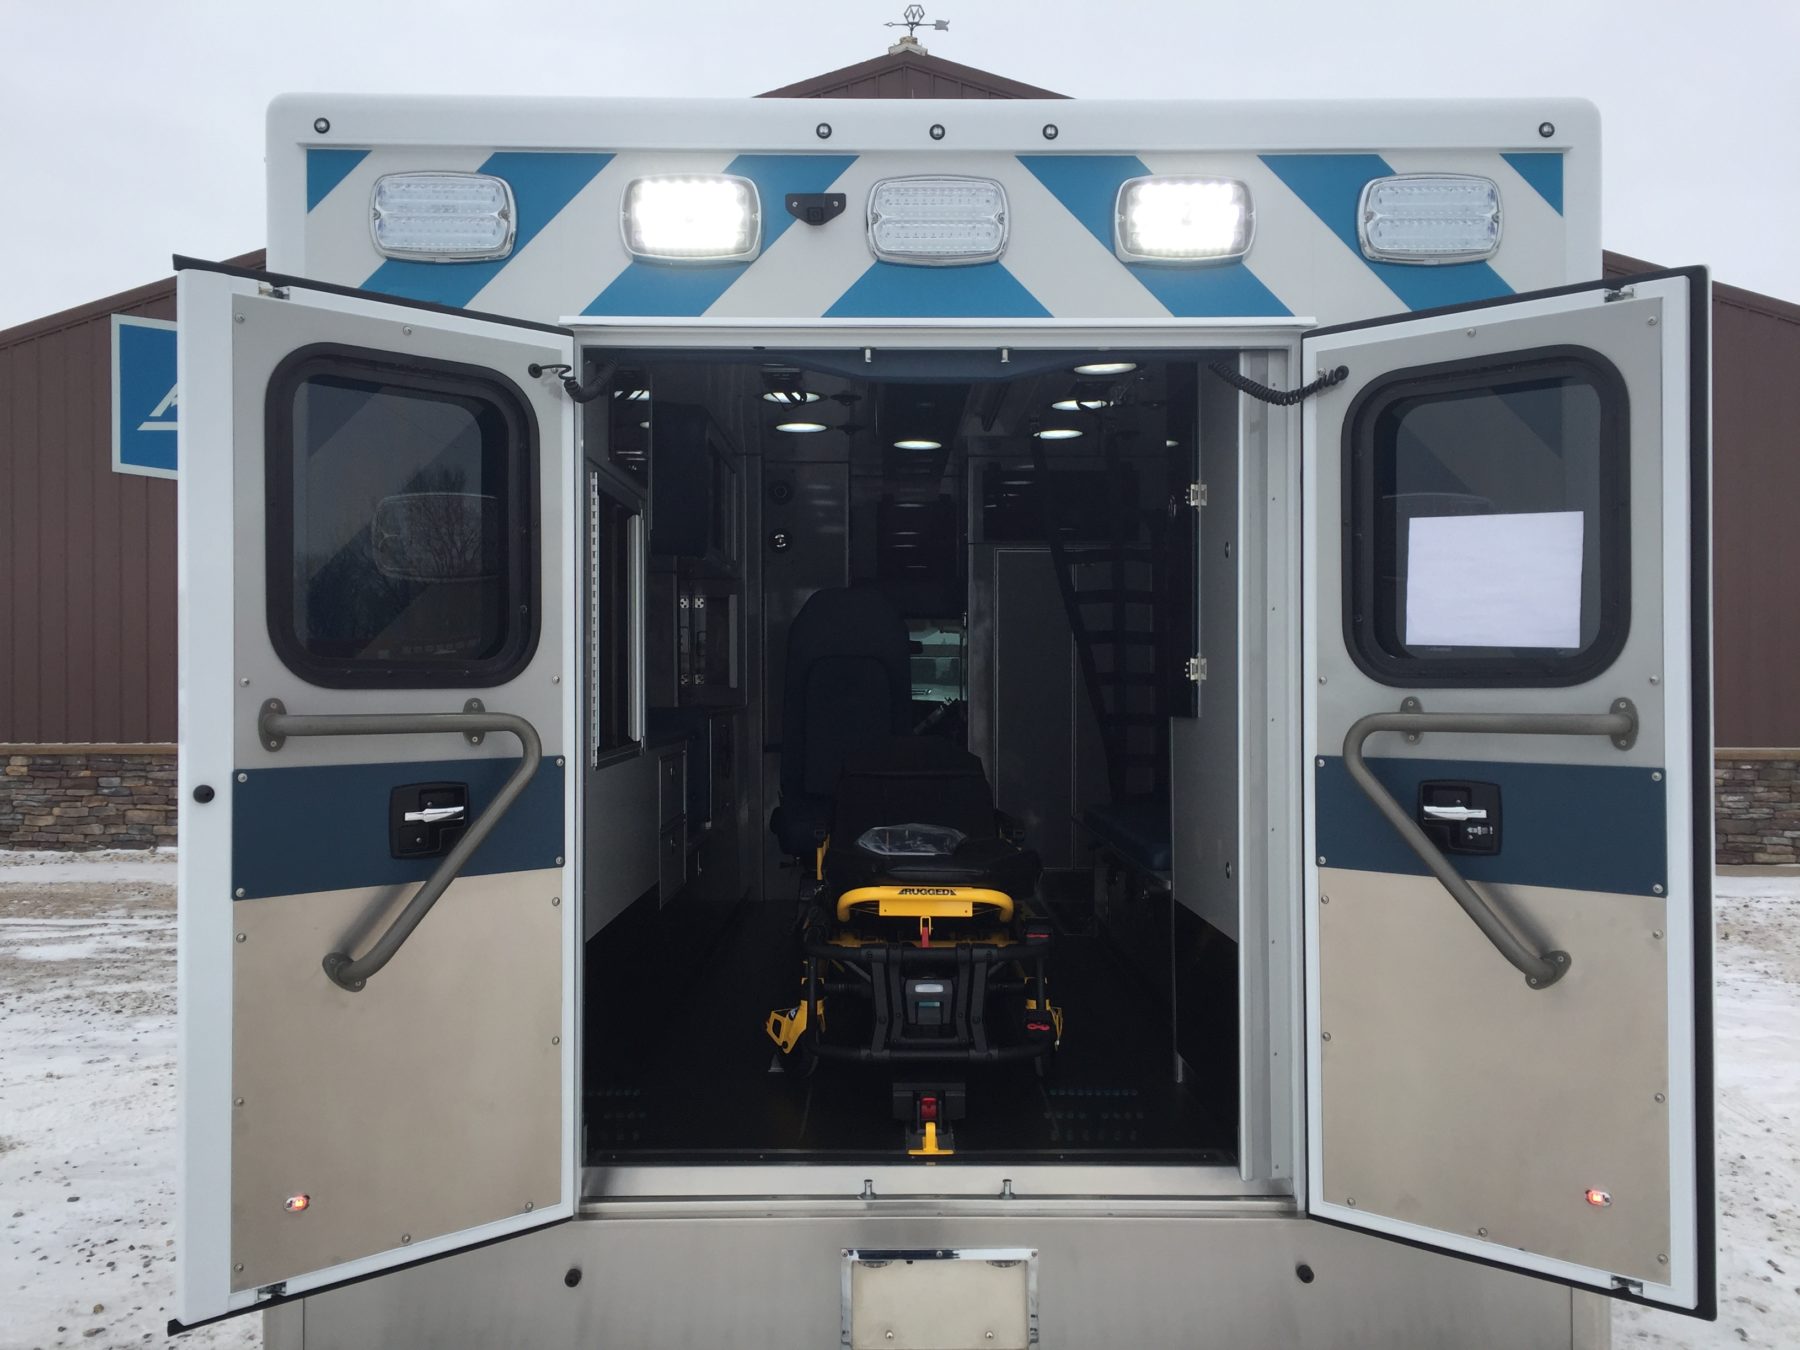 2018 Chevrolet G4500 Type 3 Ambulance For Sale – Picture 6